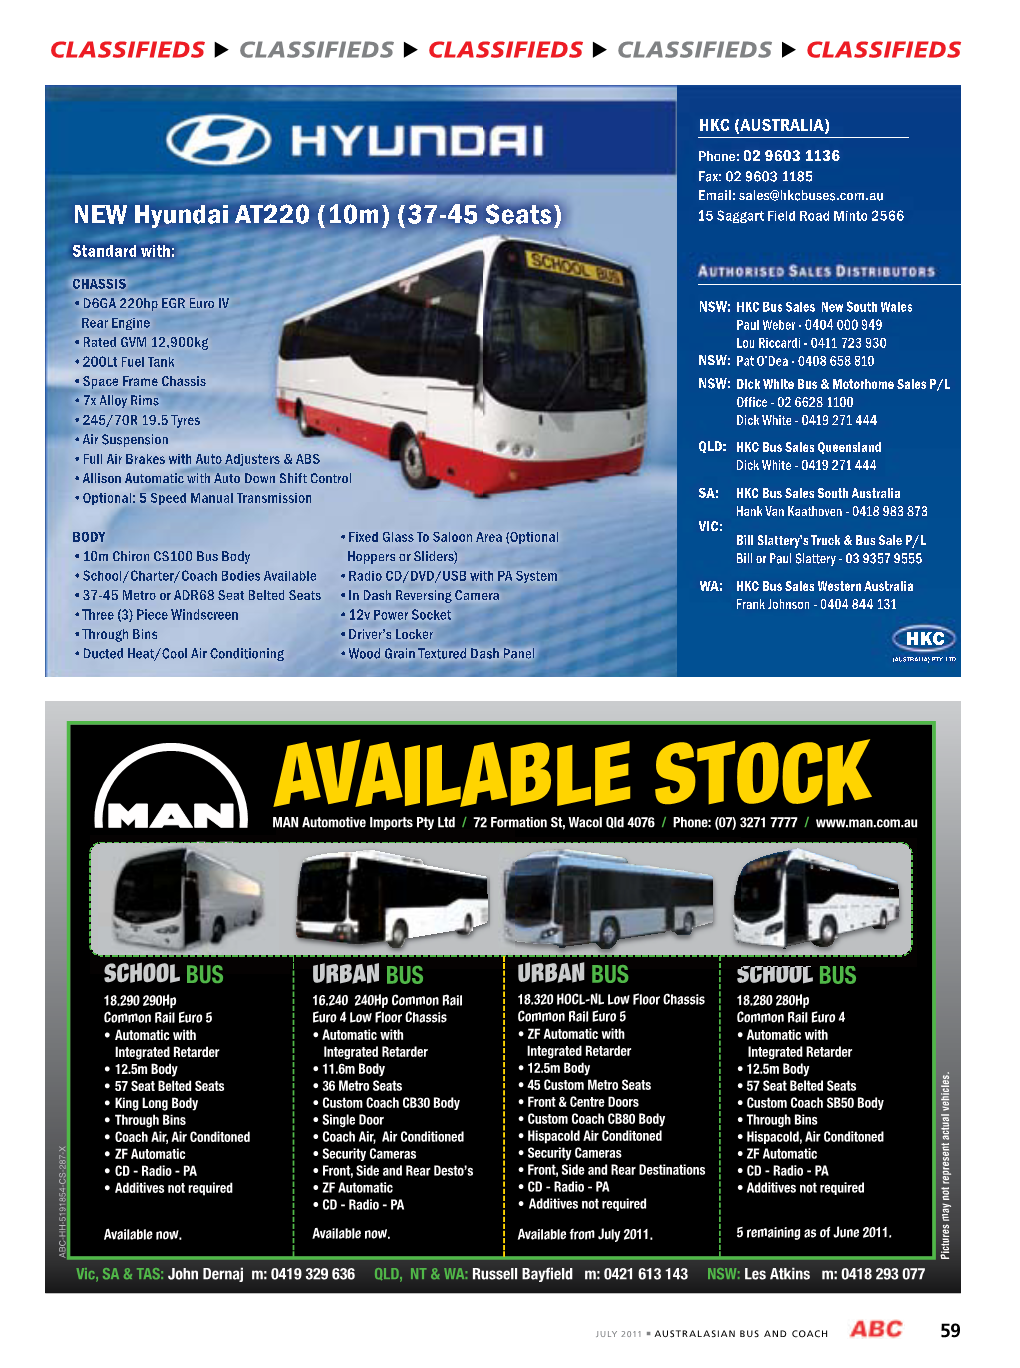 AVAILABLE STOCK MAN Automotive Imports Pty Ltd / 72 Formation St, Wacol Qld 4076 / Phone: (07) 3271 7777